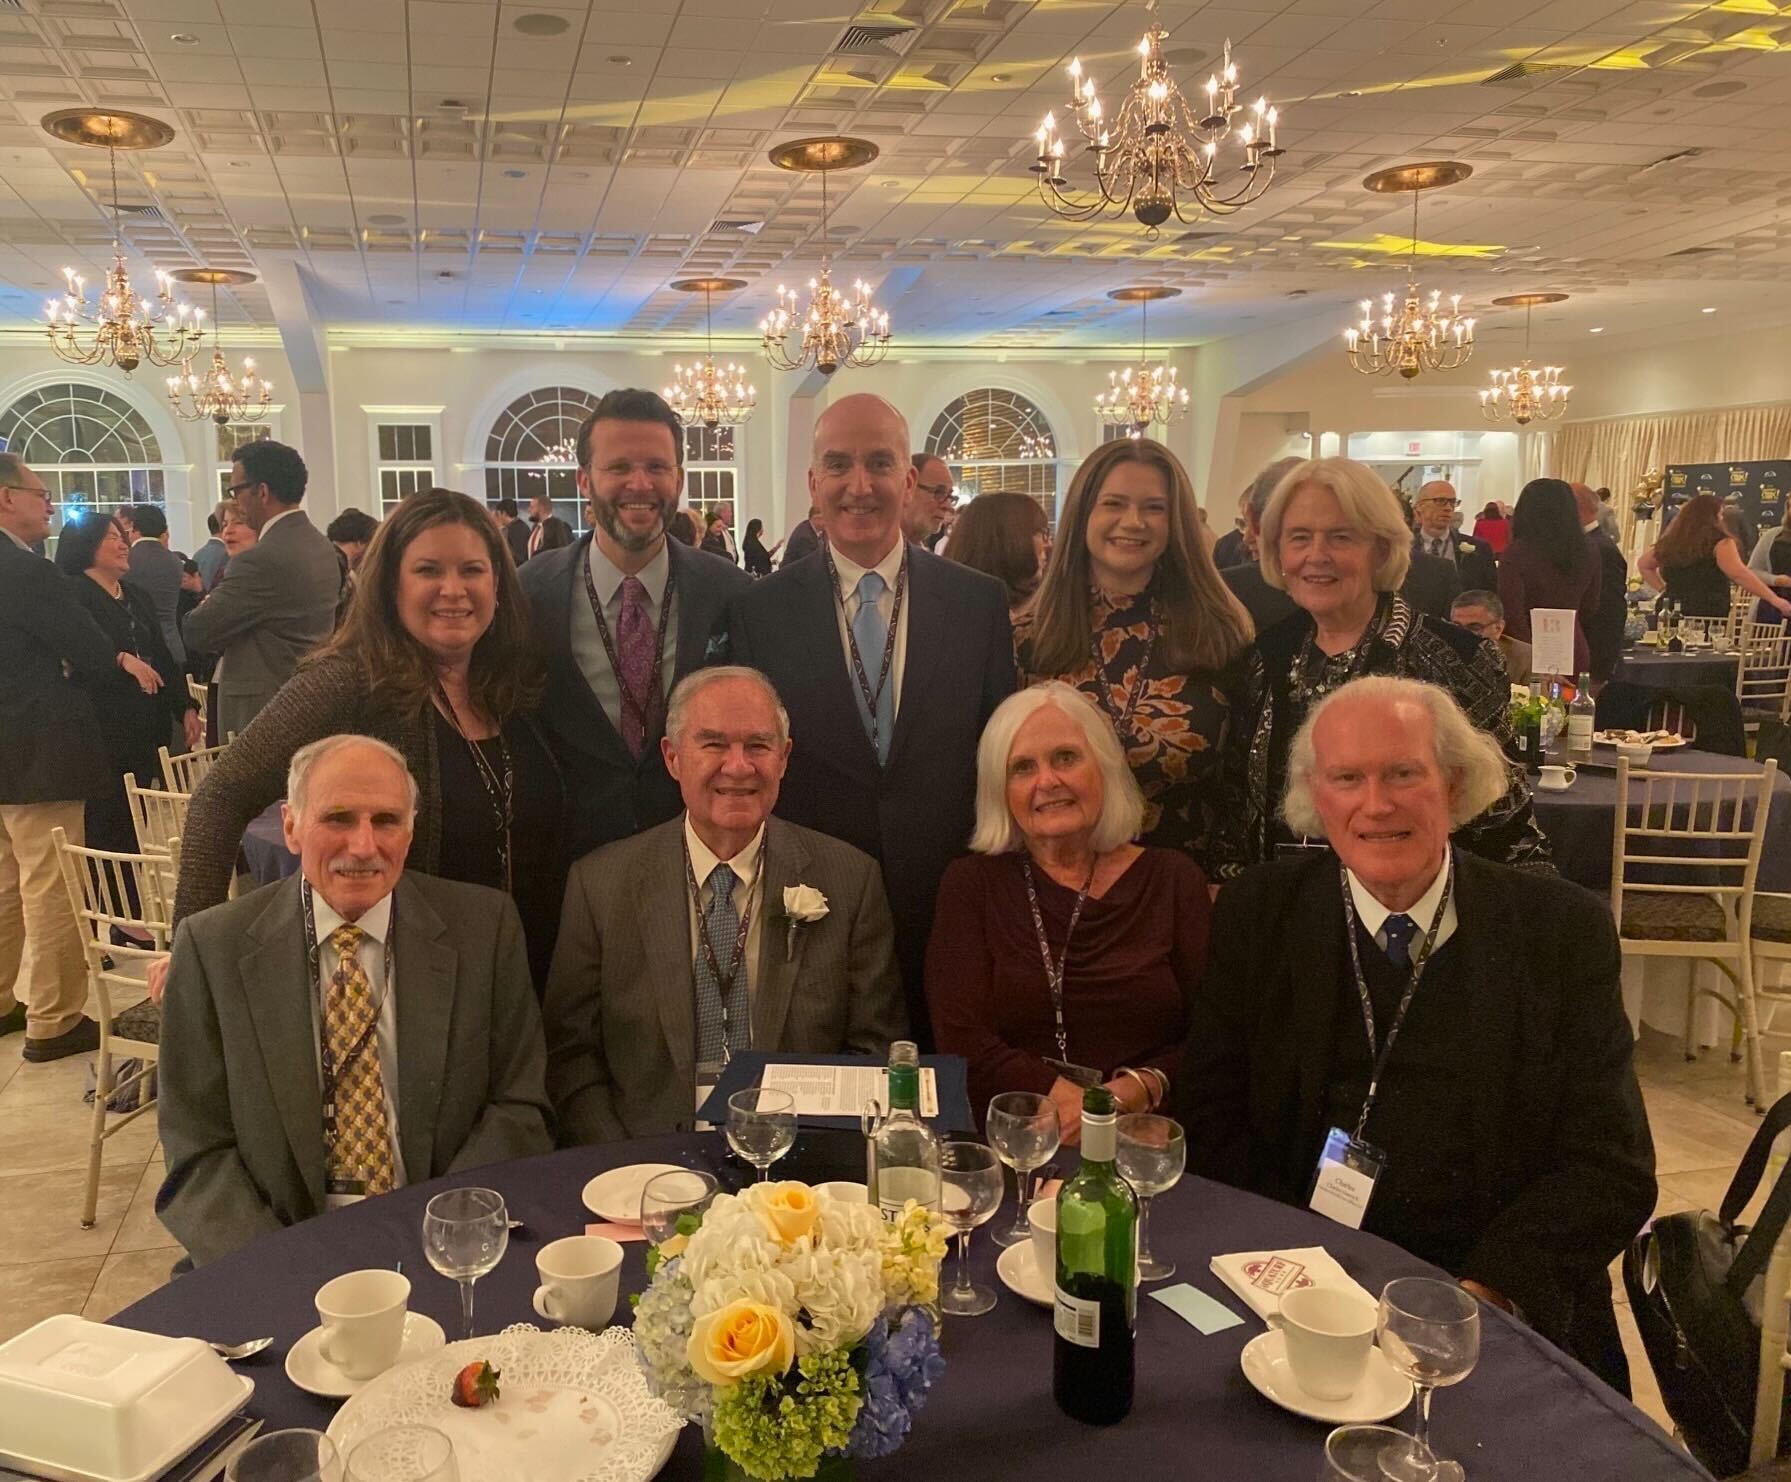 Joe Garrison Honored With the Connecticut Bar Association’s Edward F. Hennessey Professionalism Award